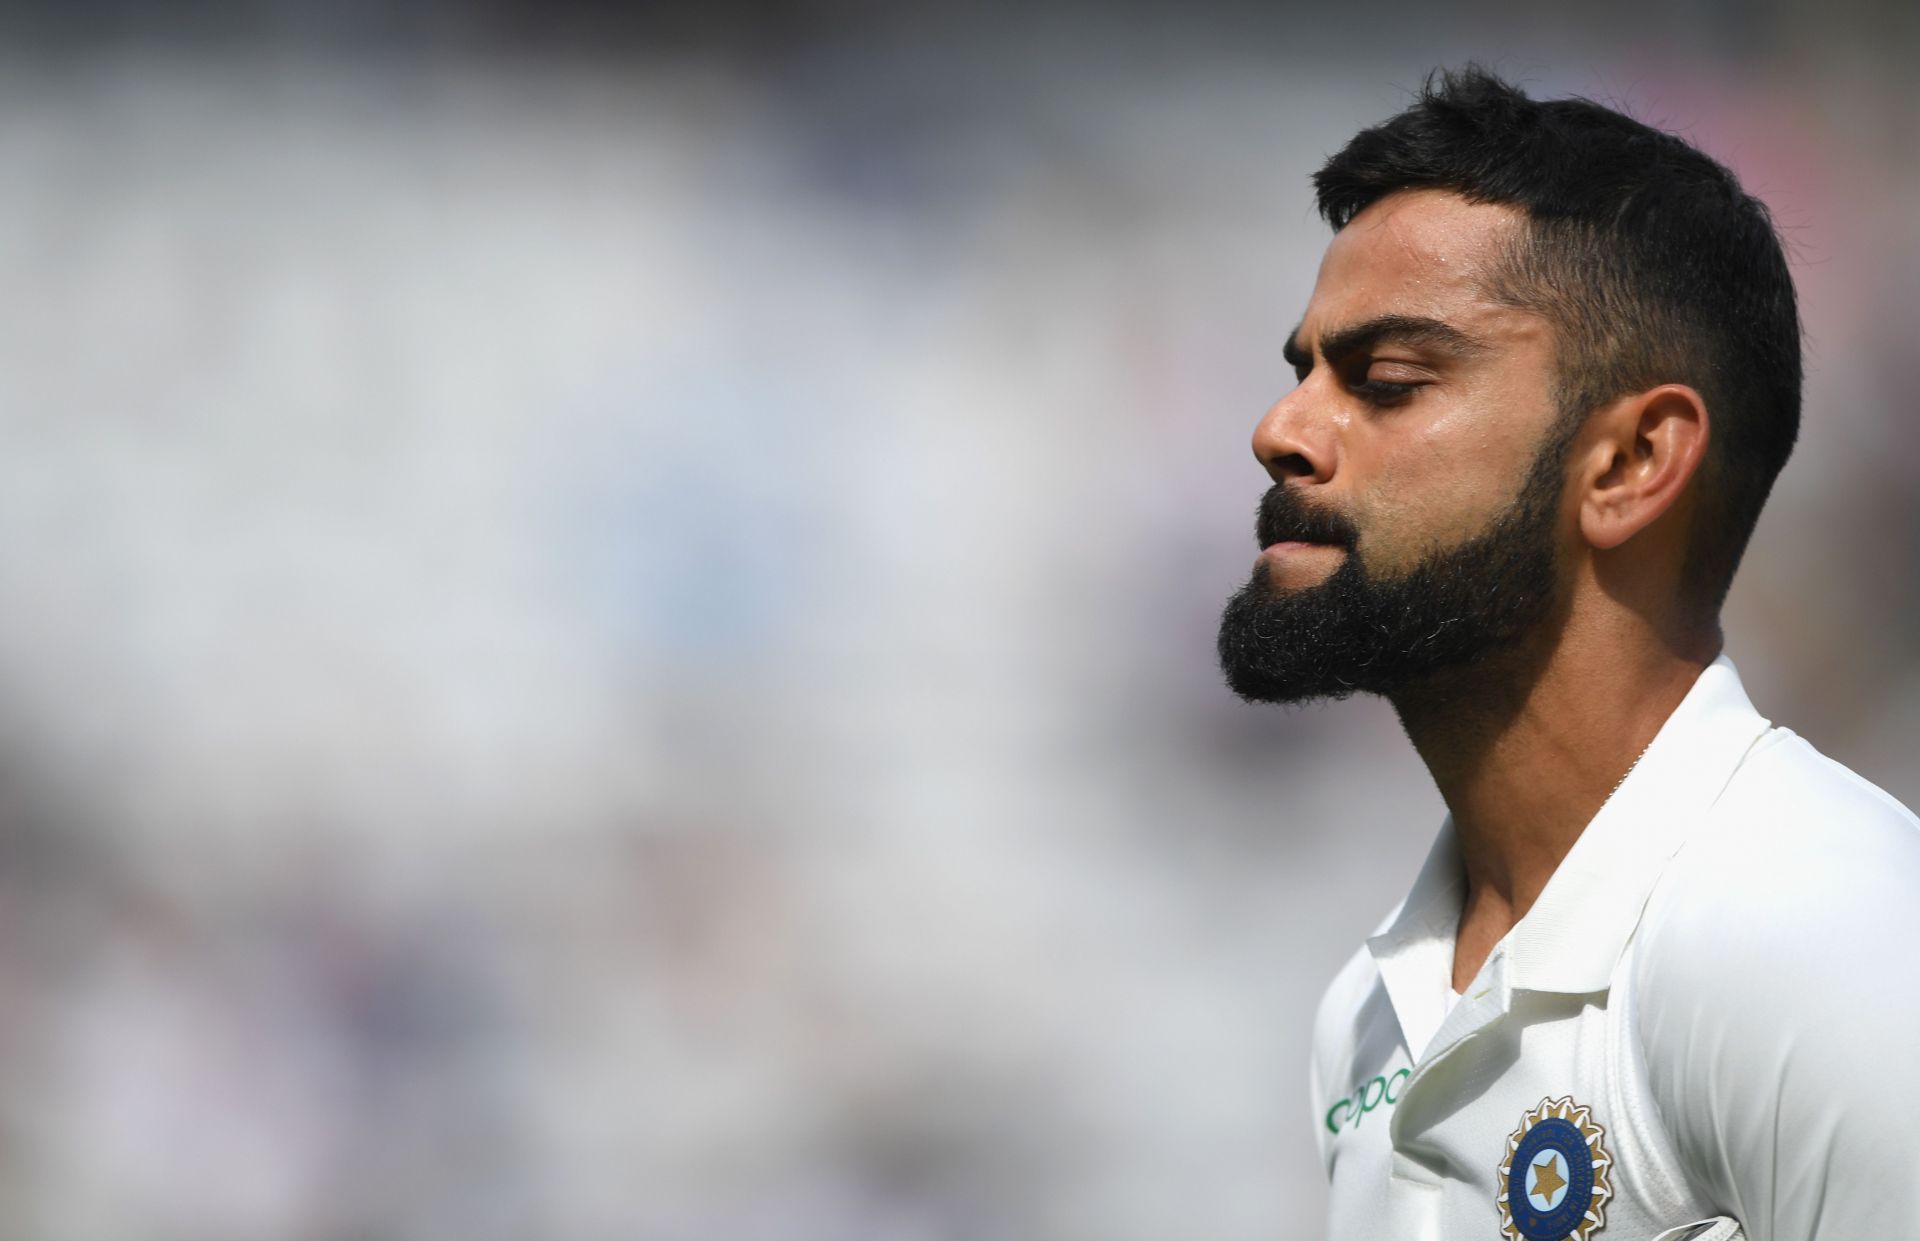 Social media was abuzz with Kohli missing out on a hundred